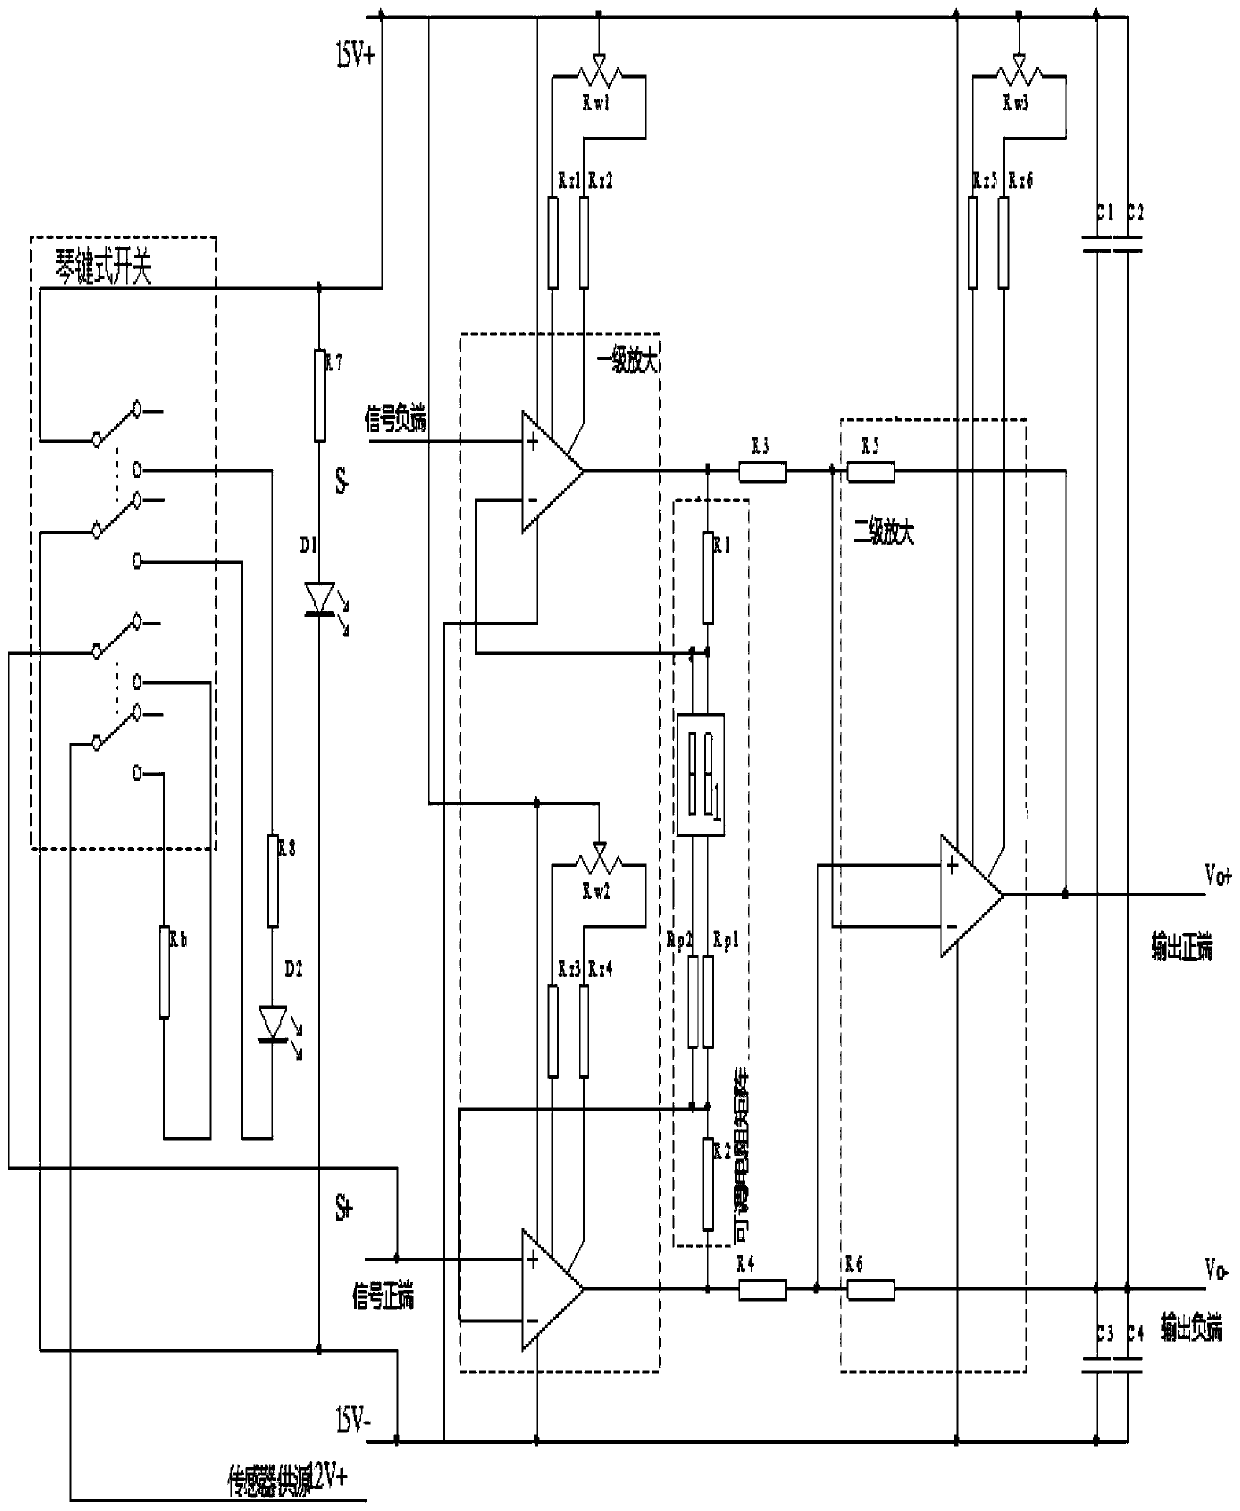 Water hammer pressure signal conditioning device suitable for LMS collection system